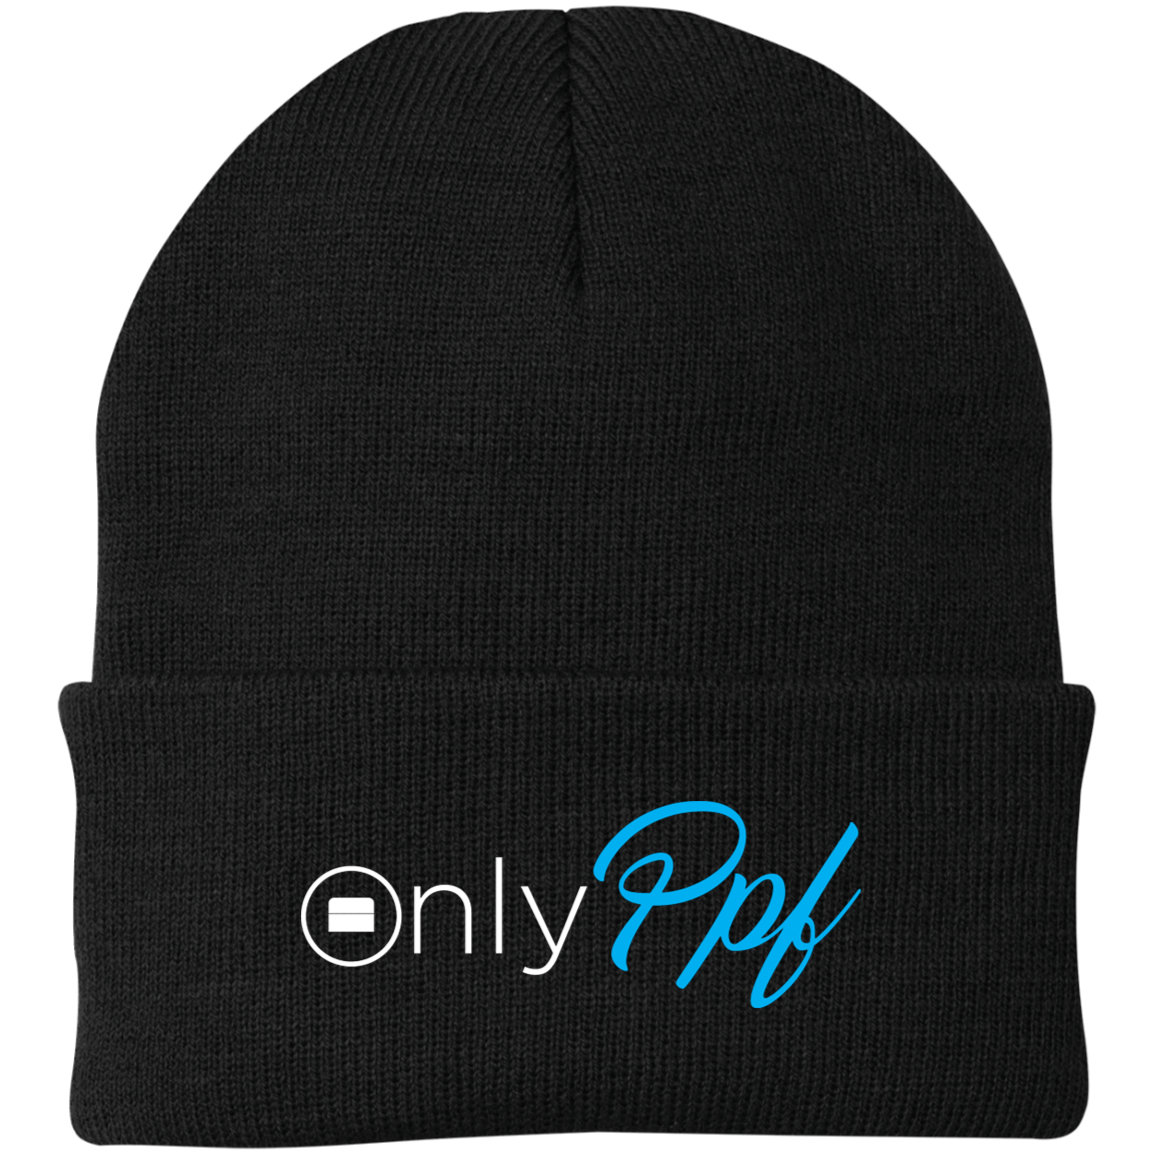 OnlyPPF Embroidered Knit Cap